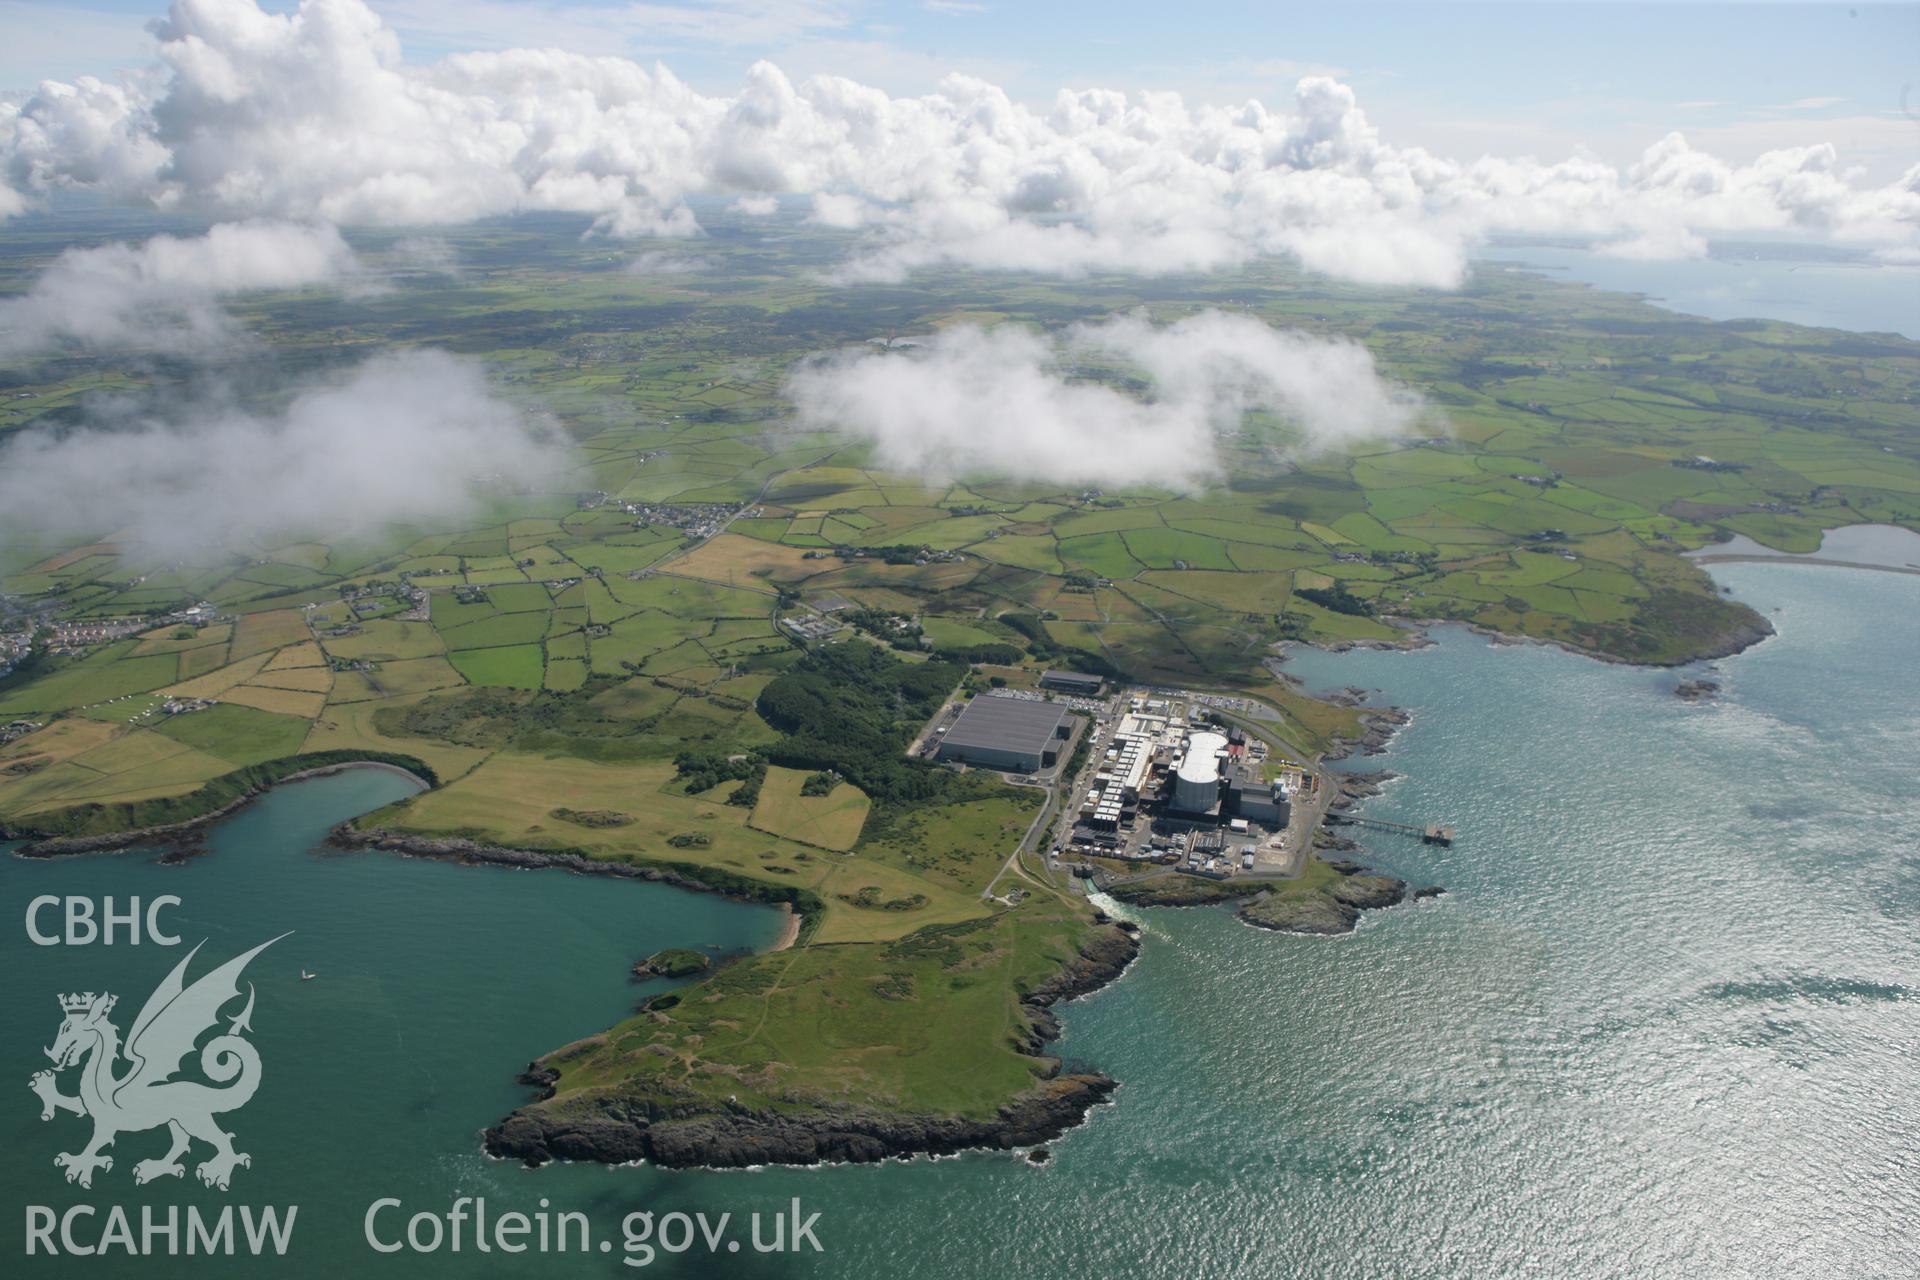 RCAHMW colour oblique photograph of Wylfa Nuclear Power Station, high view. Taken by Toby Driver on 20/07/2011.